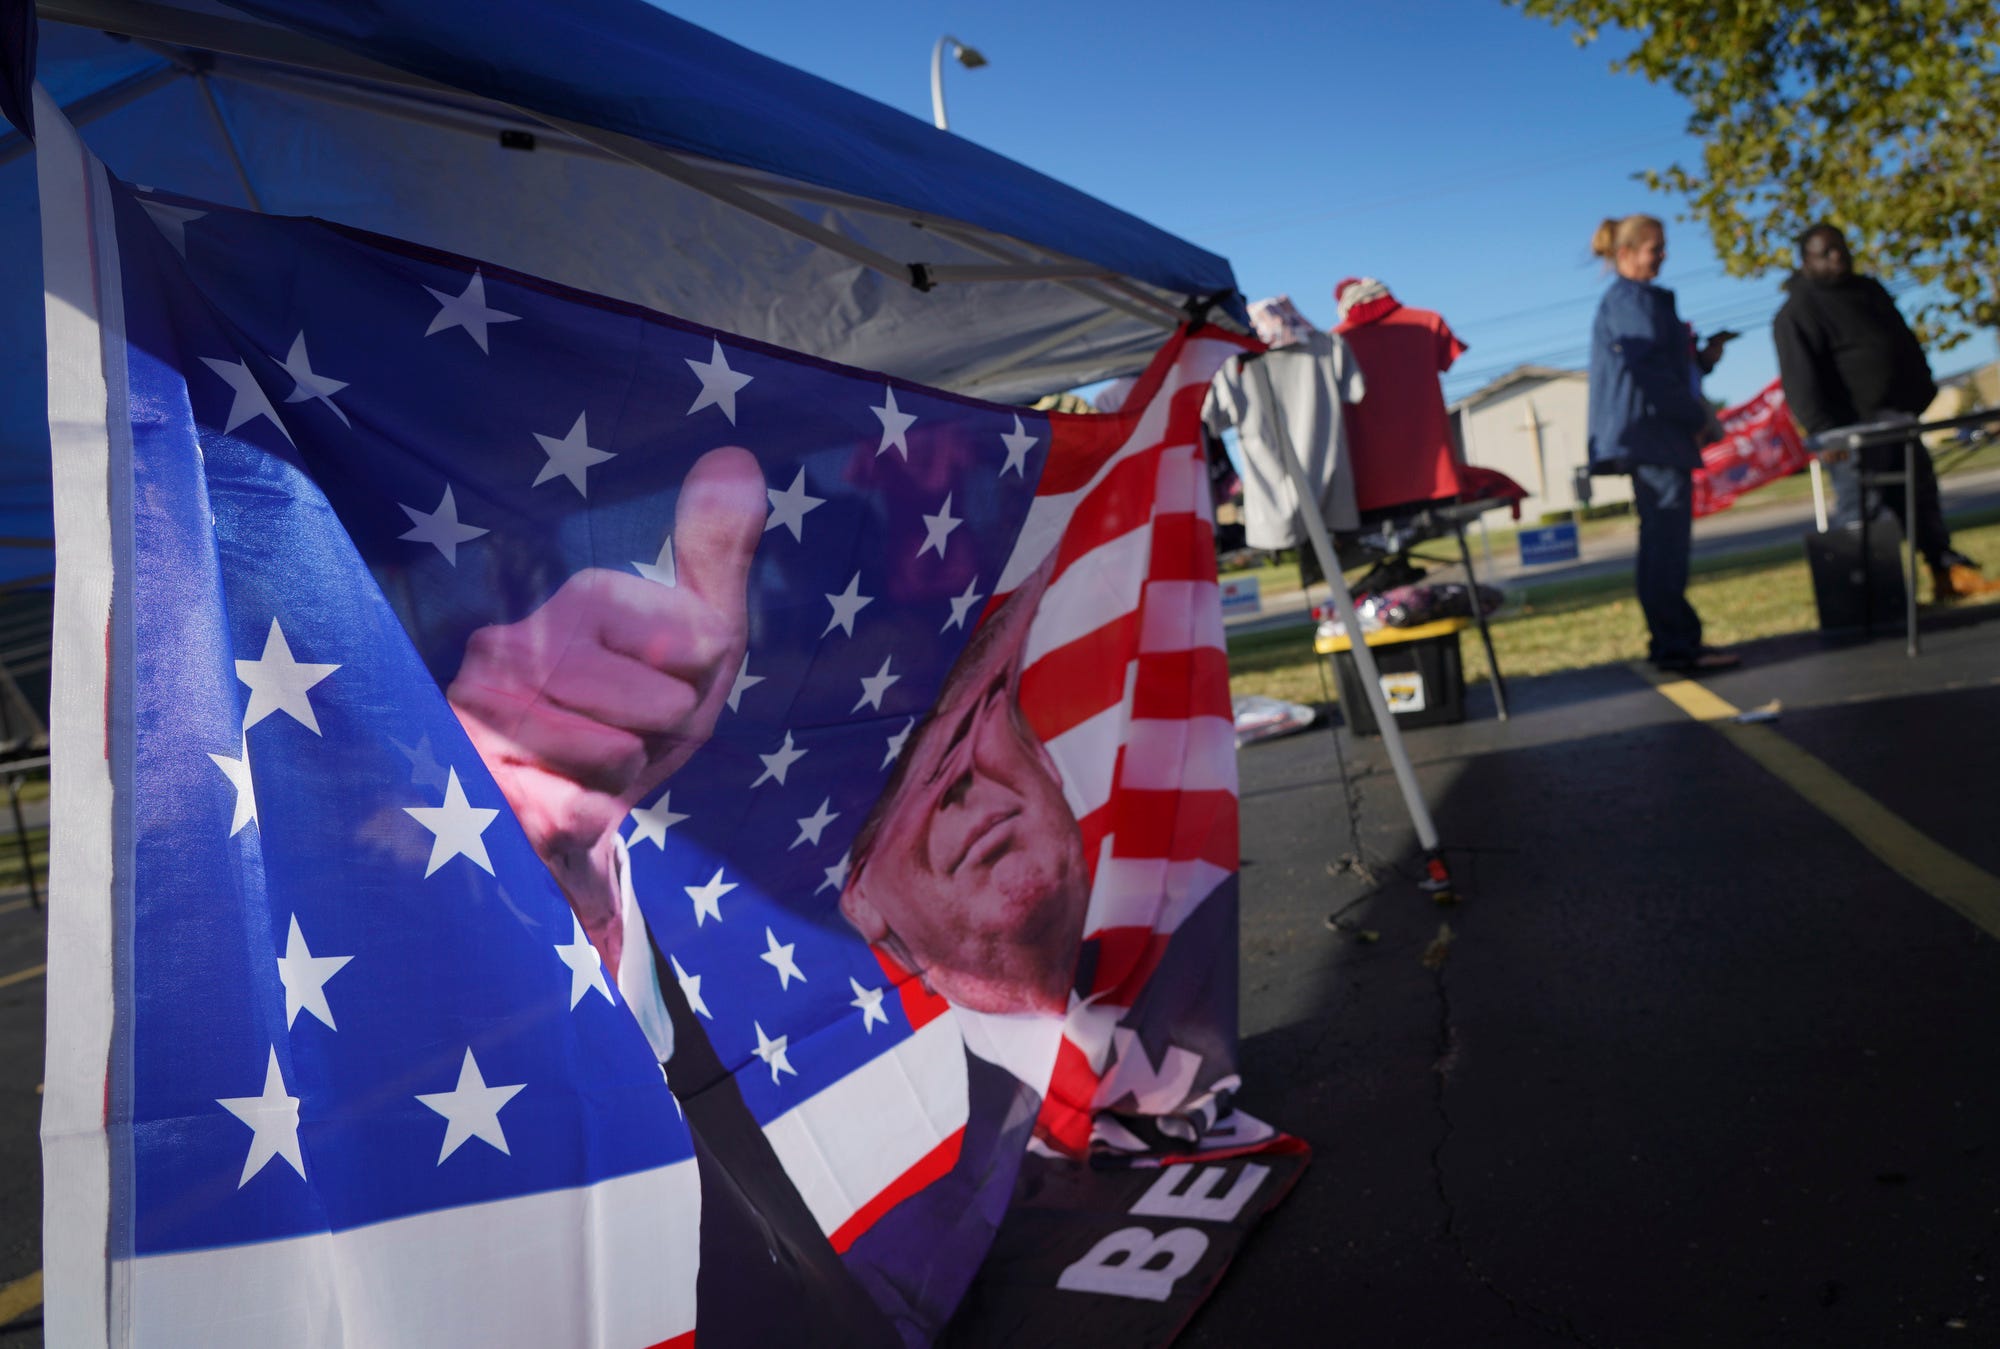 A person attending a Donald Trump rally held Oct. 1, 2022, at Macomb Community College in Warren, Michigan, talks to a vendor from North Carolina about buying a T-shirt.